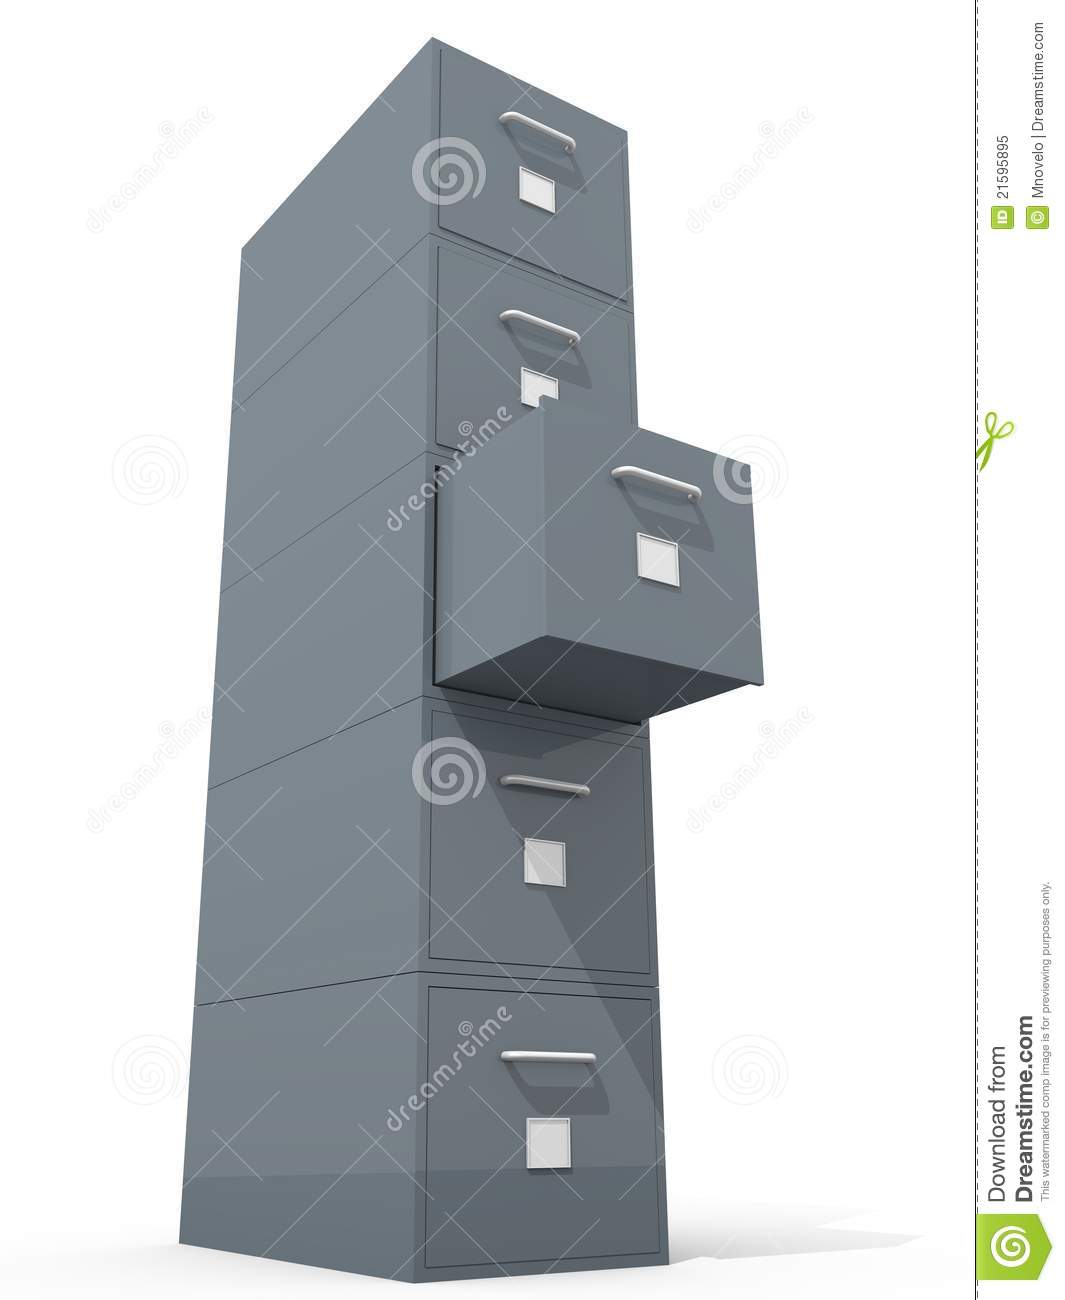 File Cabinet Royalty Free Stock Photo   Image  21595895